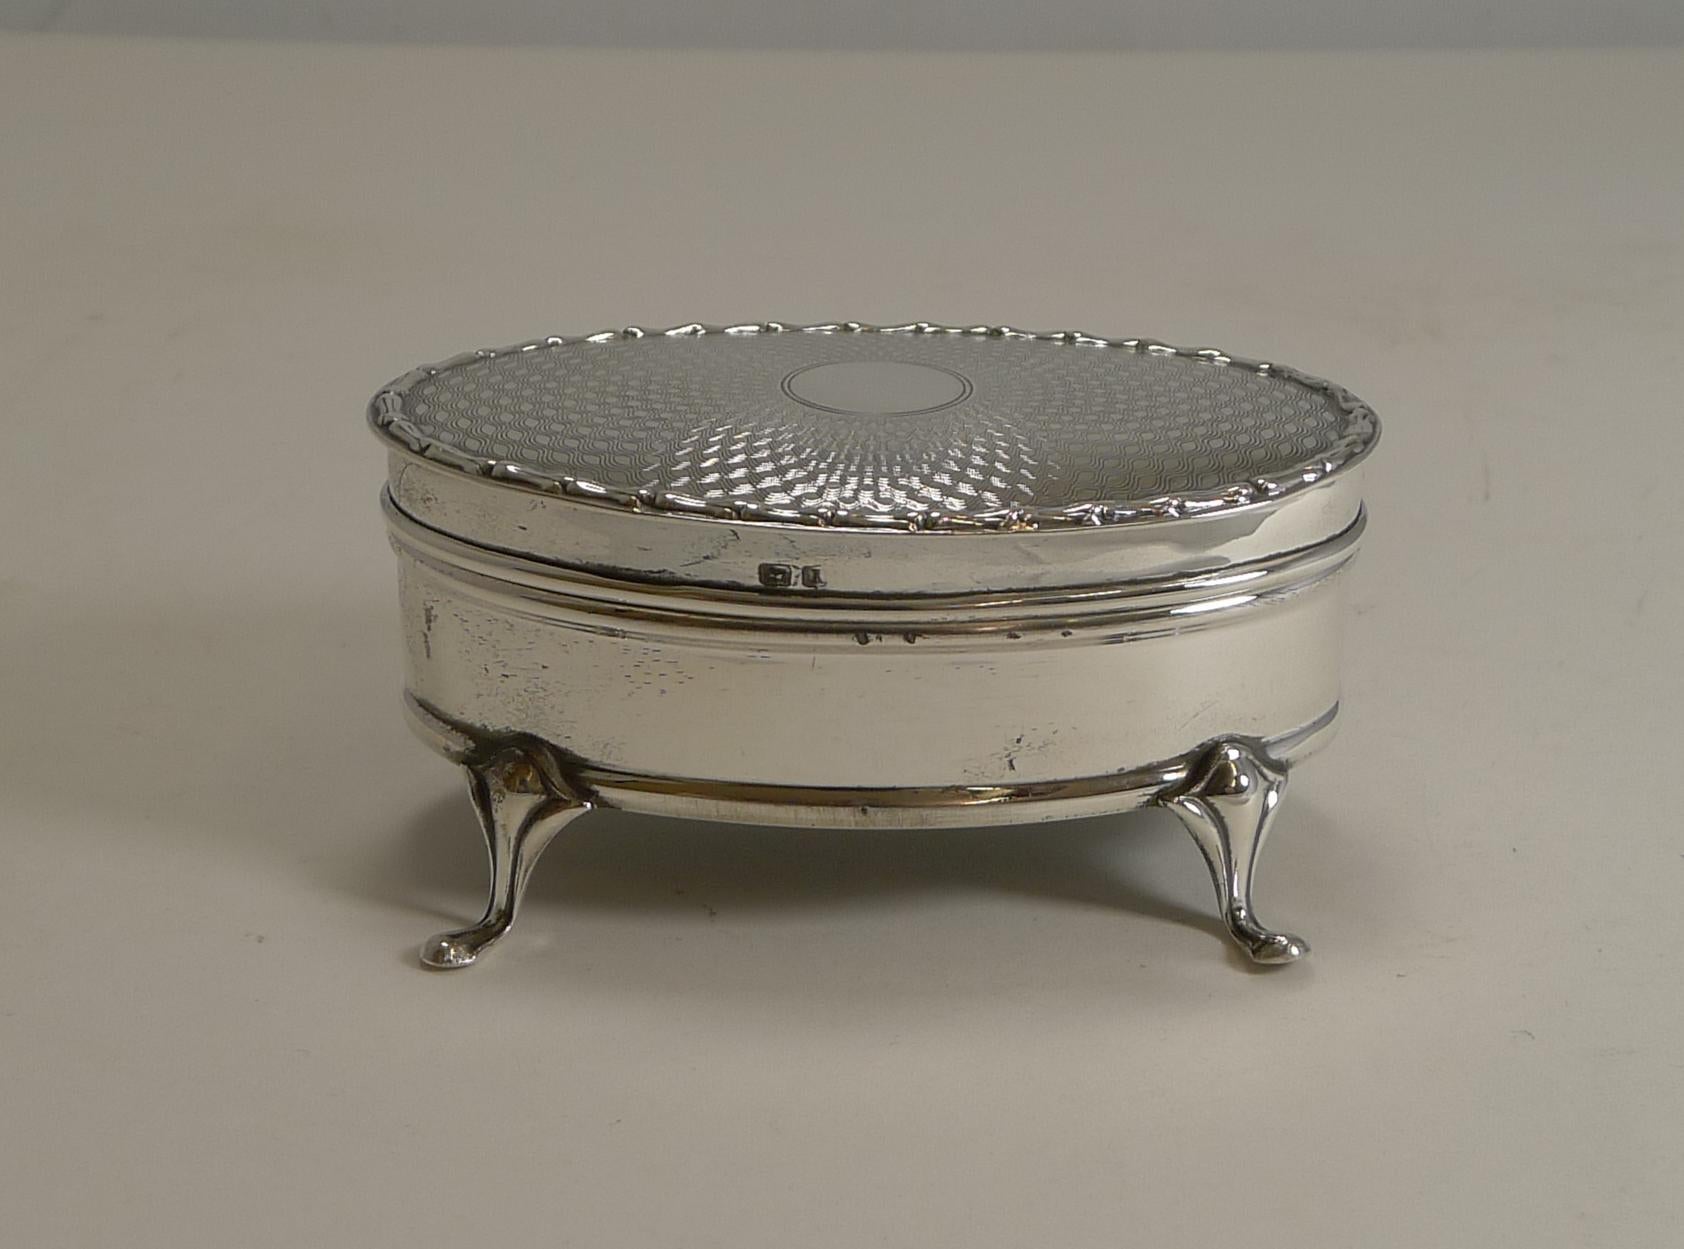 A fabulous sterling silver jewelry box standing on four very elegant feet with a stunning engine-turned decorated lid surrounding a central circular vacant cartouche.

The hinged lid fits well and has a lovely raised border. The lid opens to